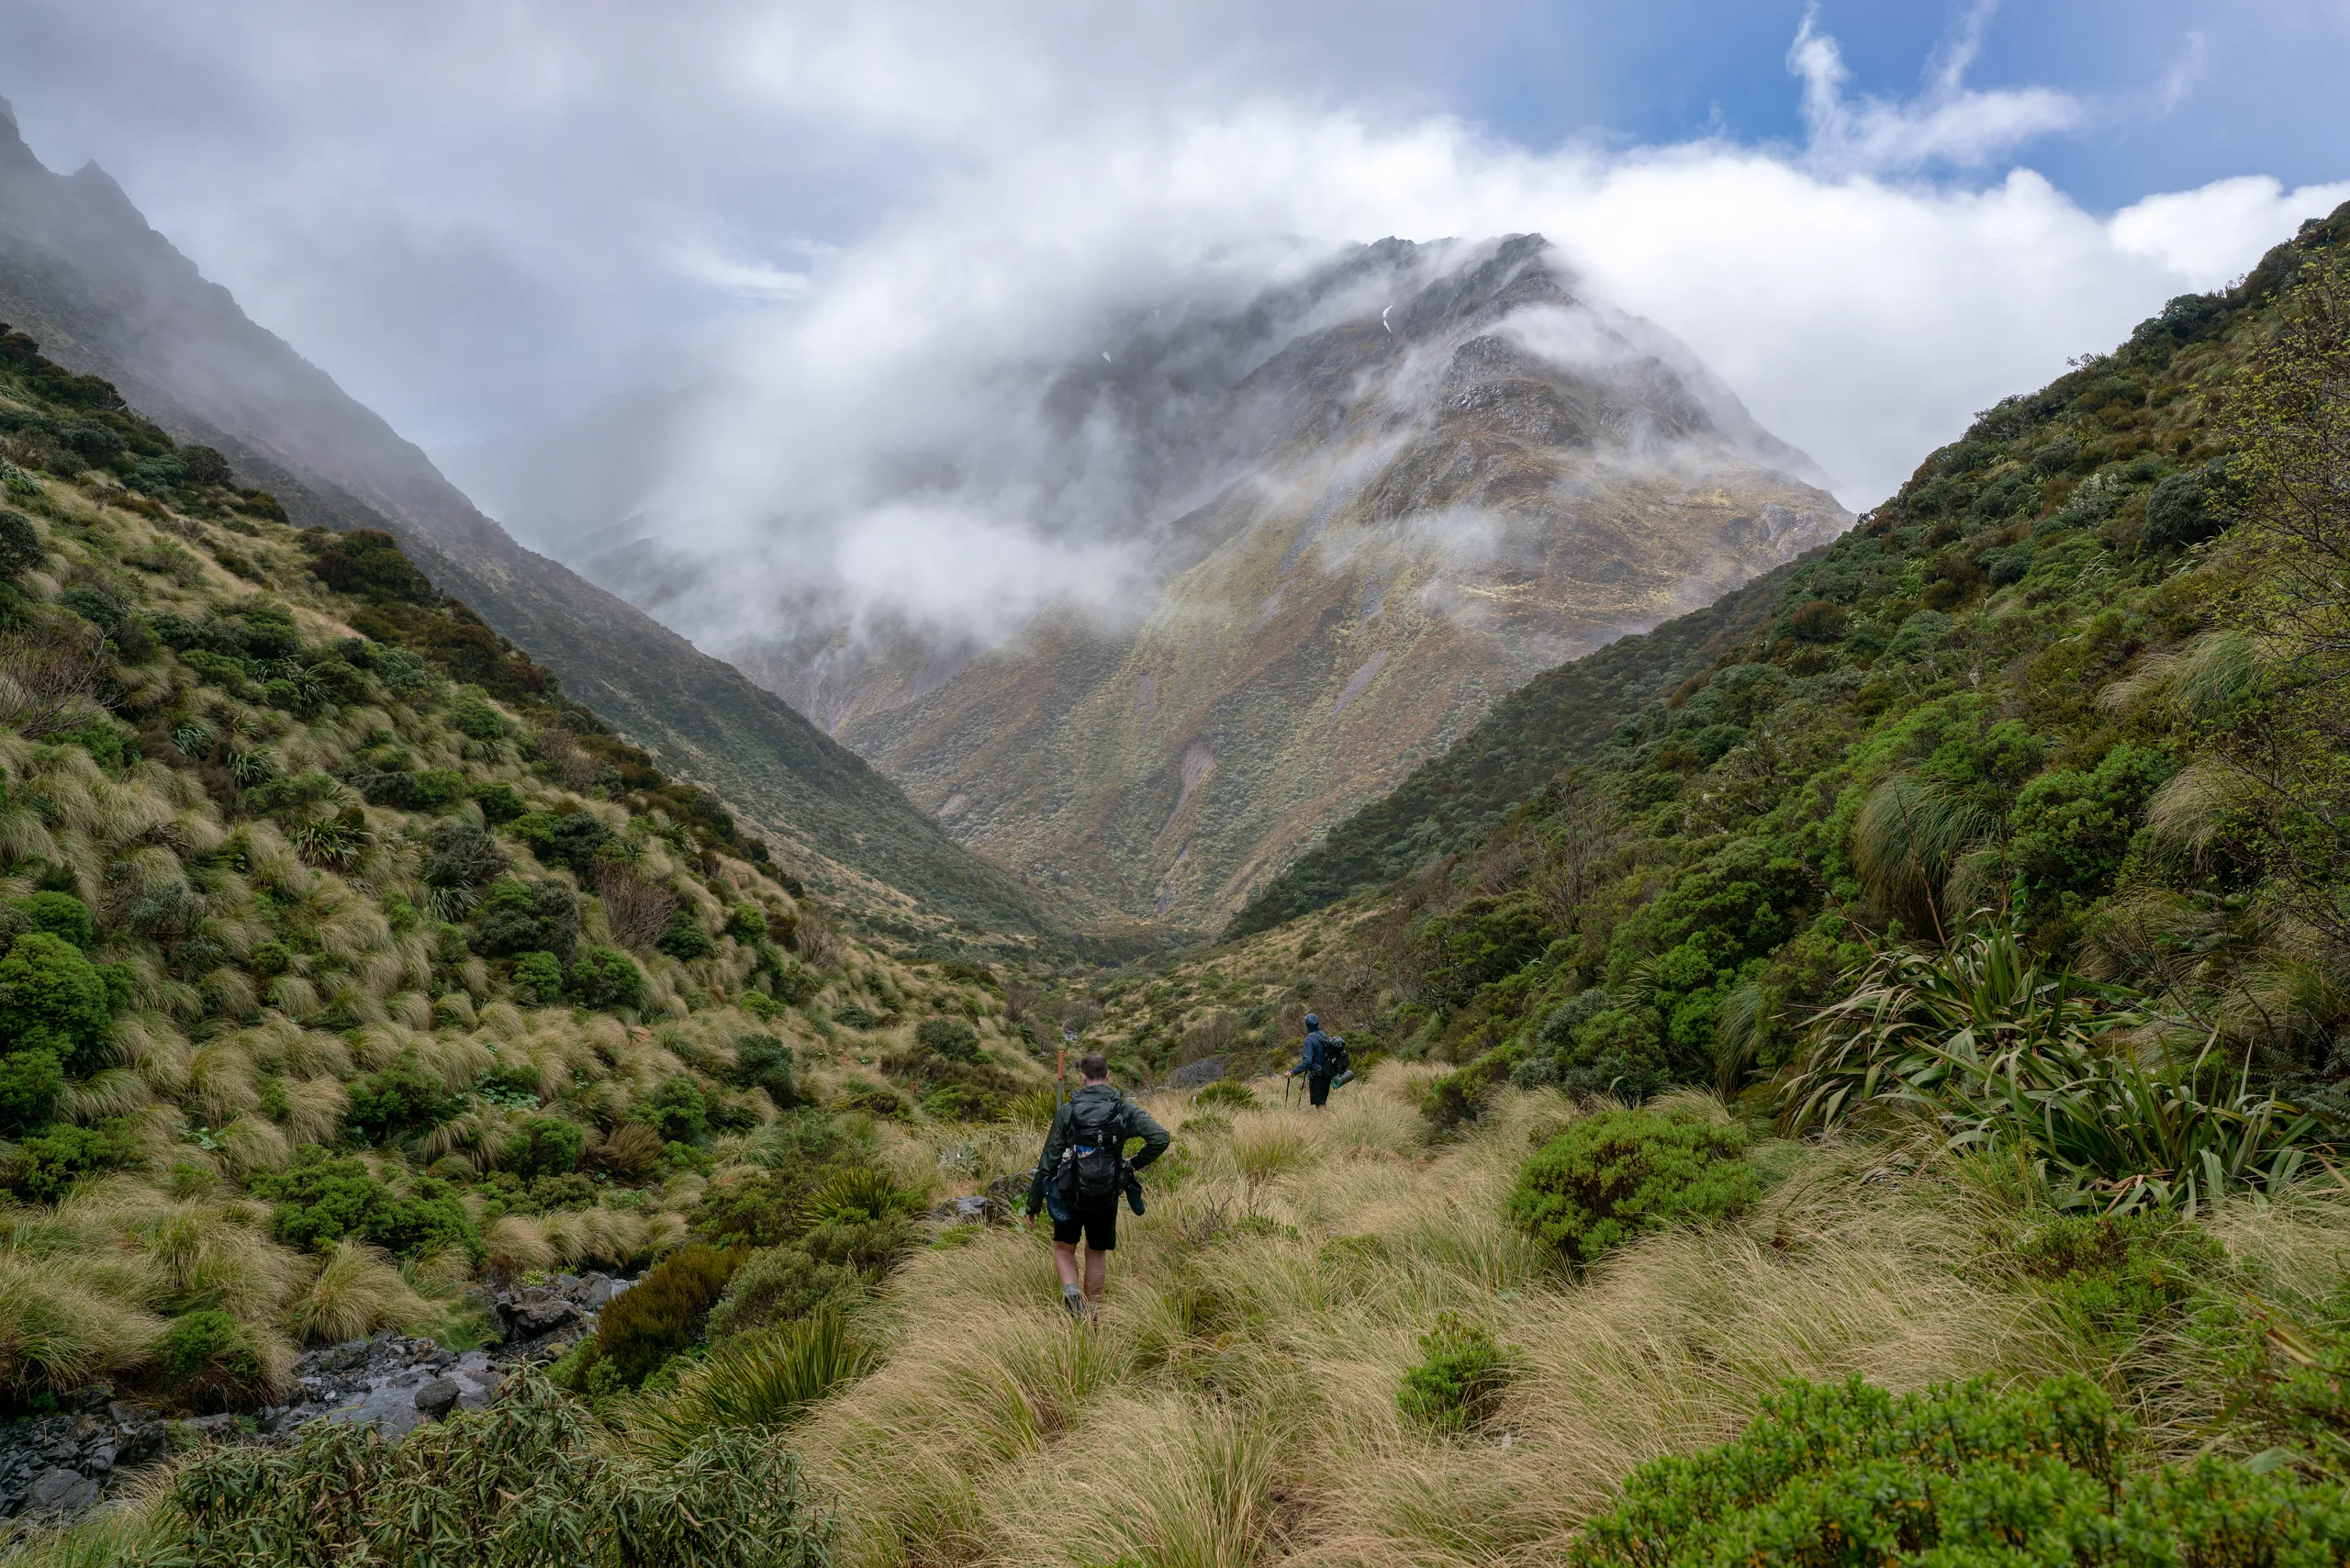 Descending the stream gorge from Tarn Col, with Pt 1742 looming large in the dramatic cloud